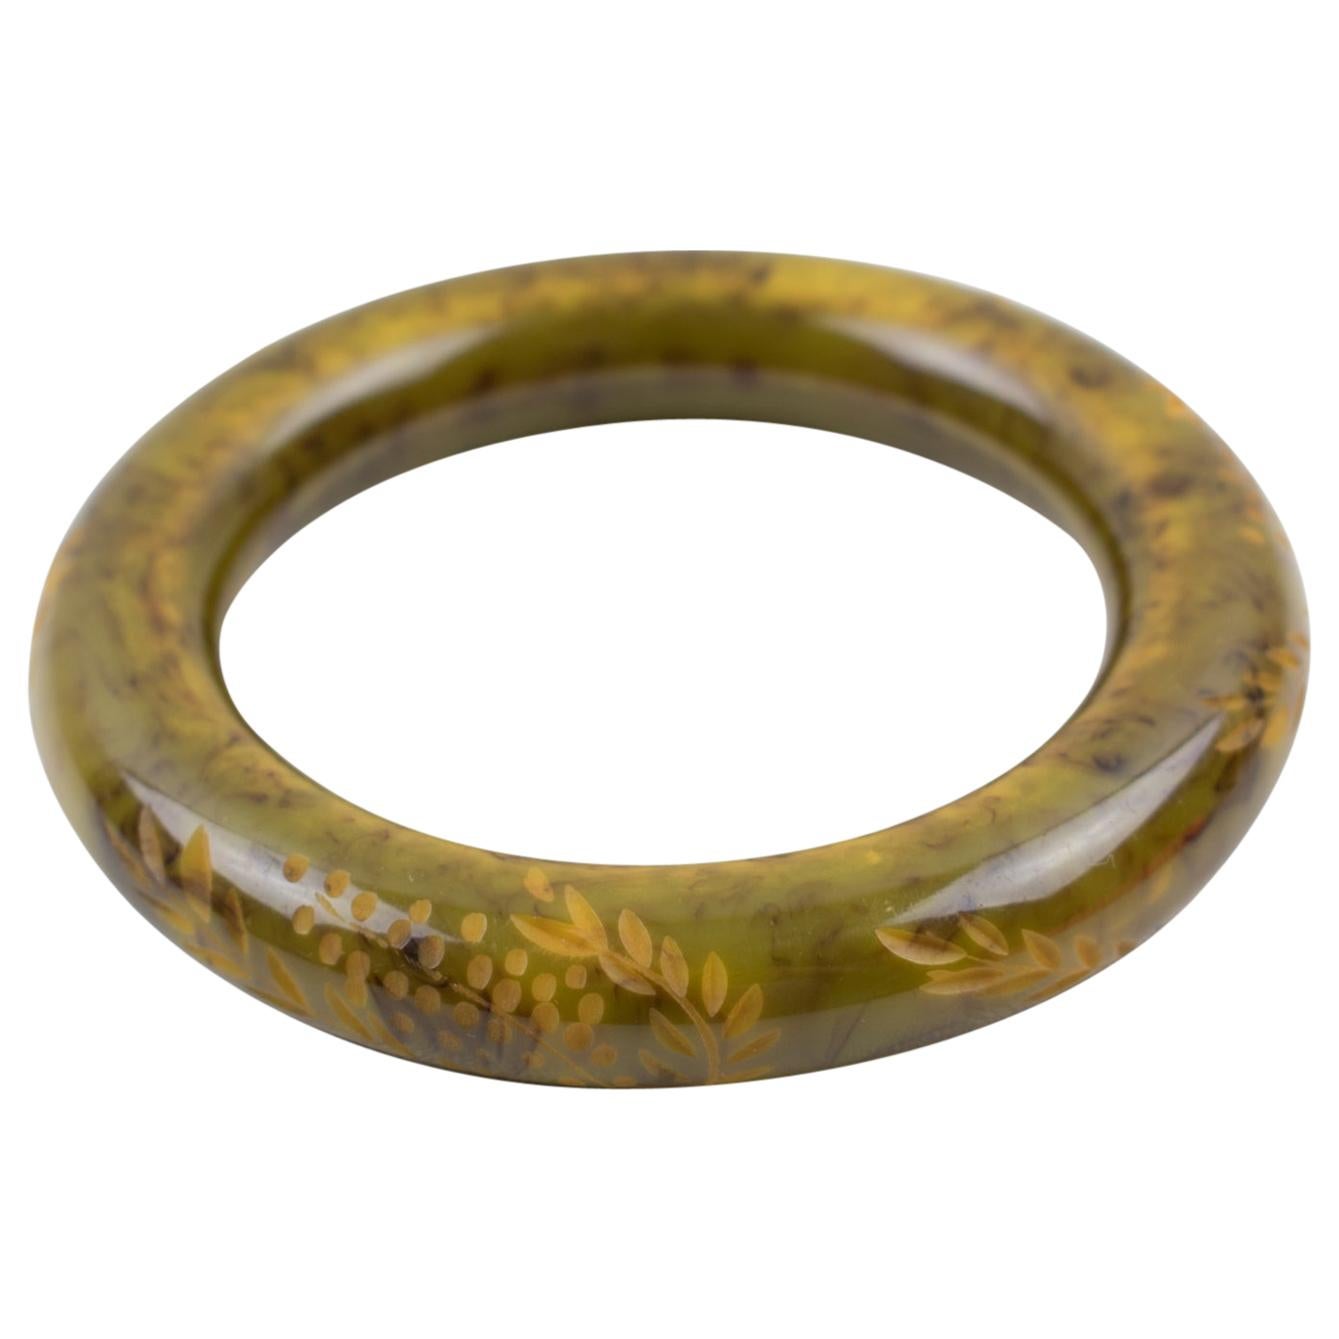 This amazing asparagus green and black marble Bakelite bracelet bangle has a chunky, rounded domed shape with deep floral carving all around it. The piece boasts an intense light asparagus green marble color with black and yellow cloudy